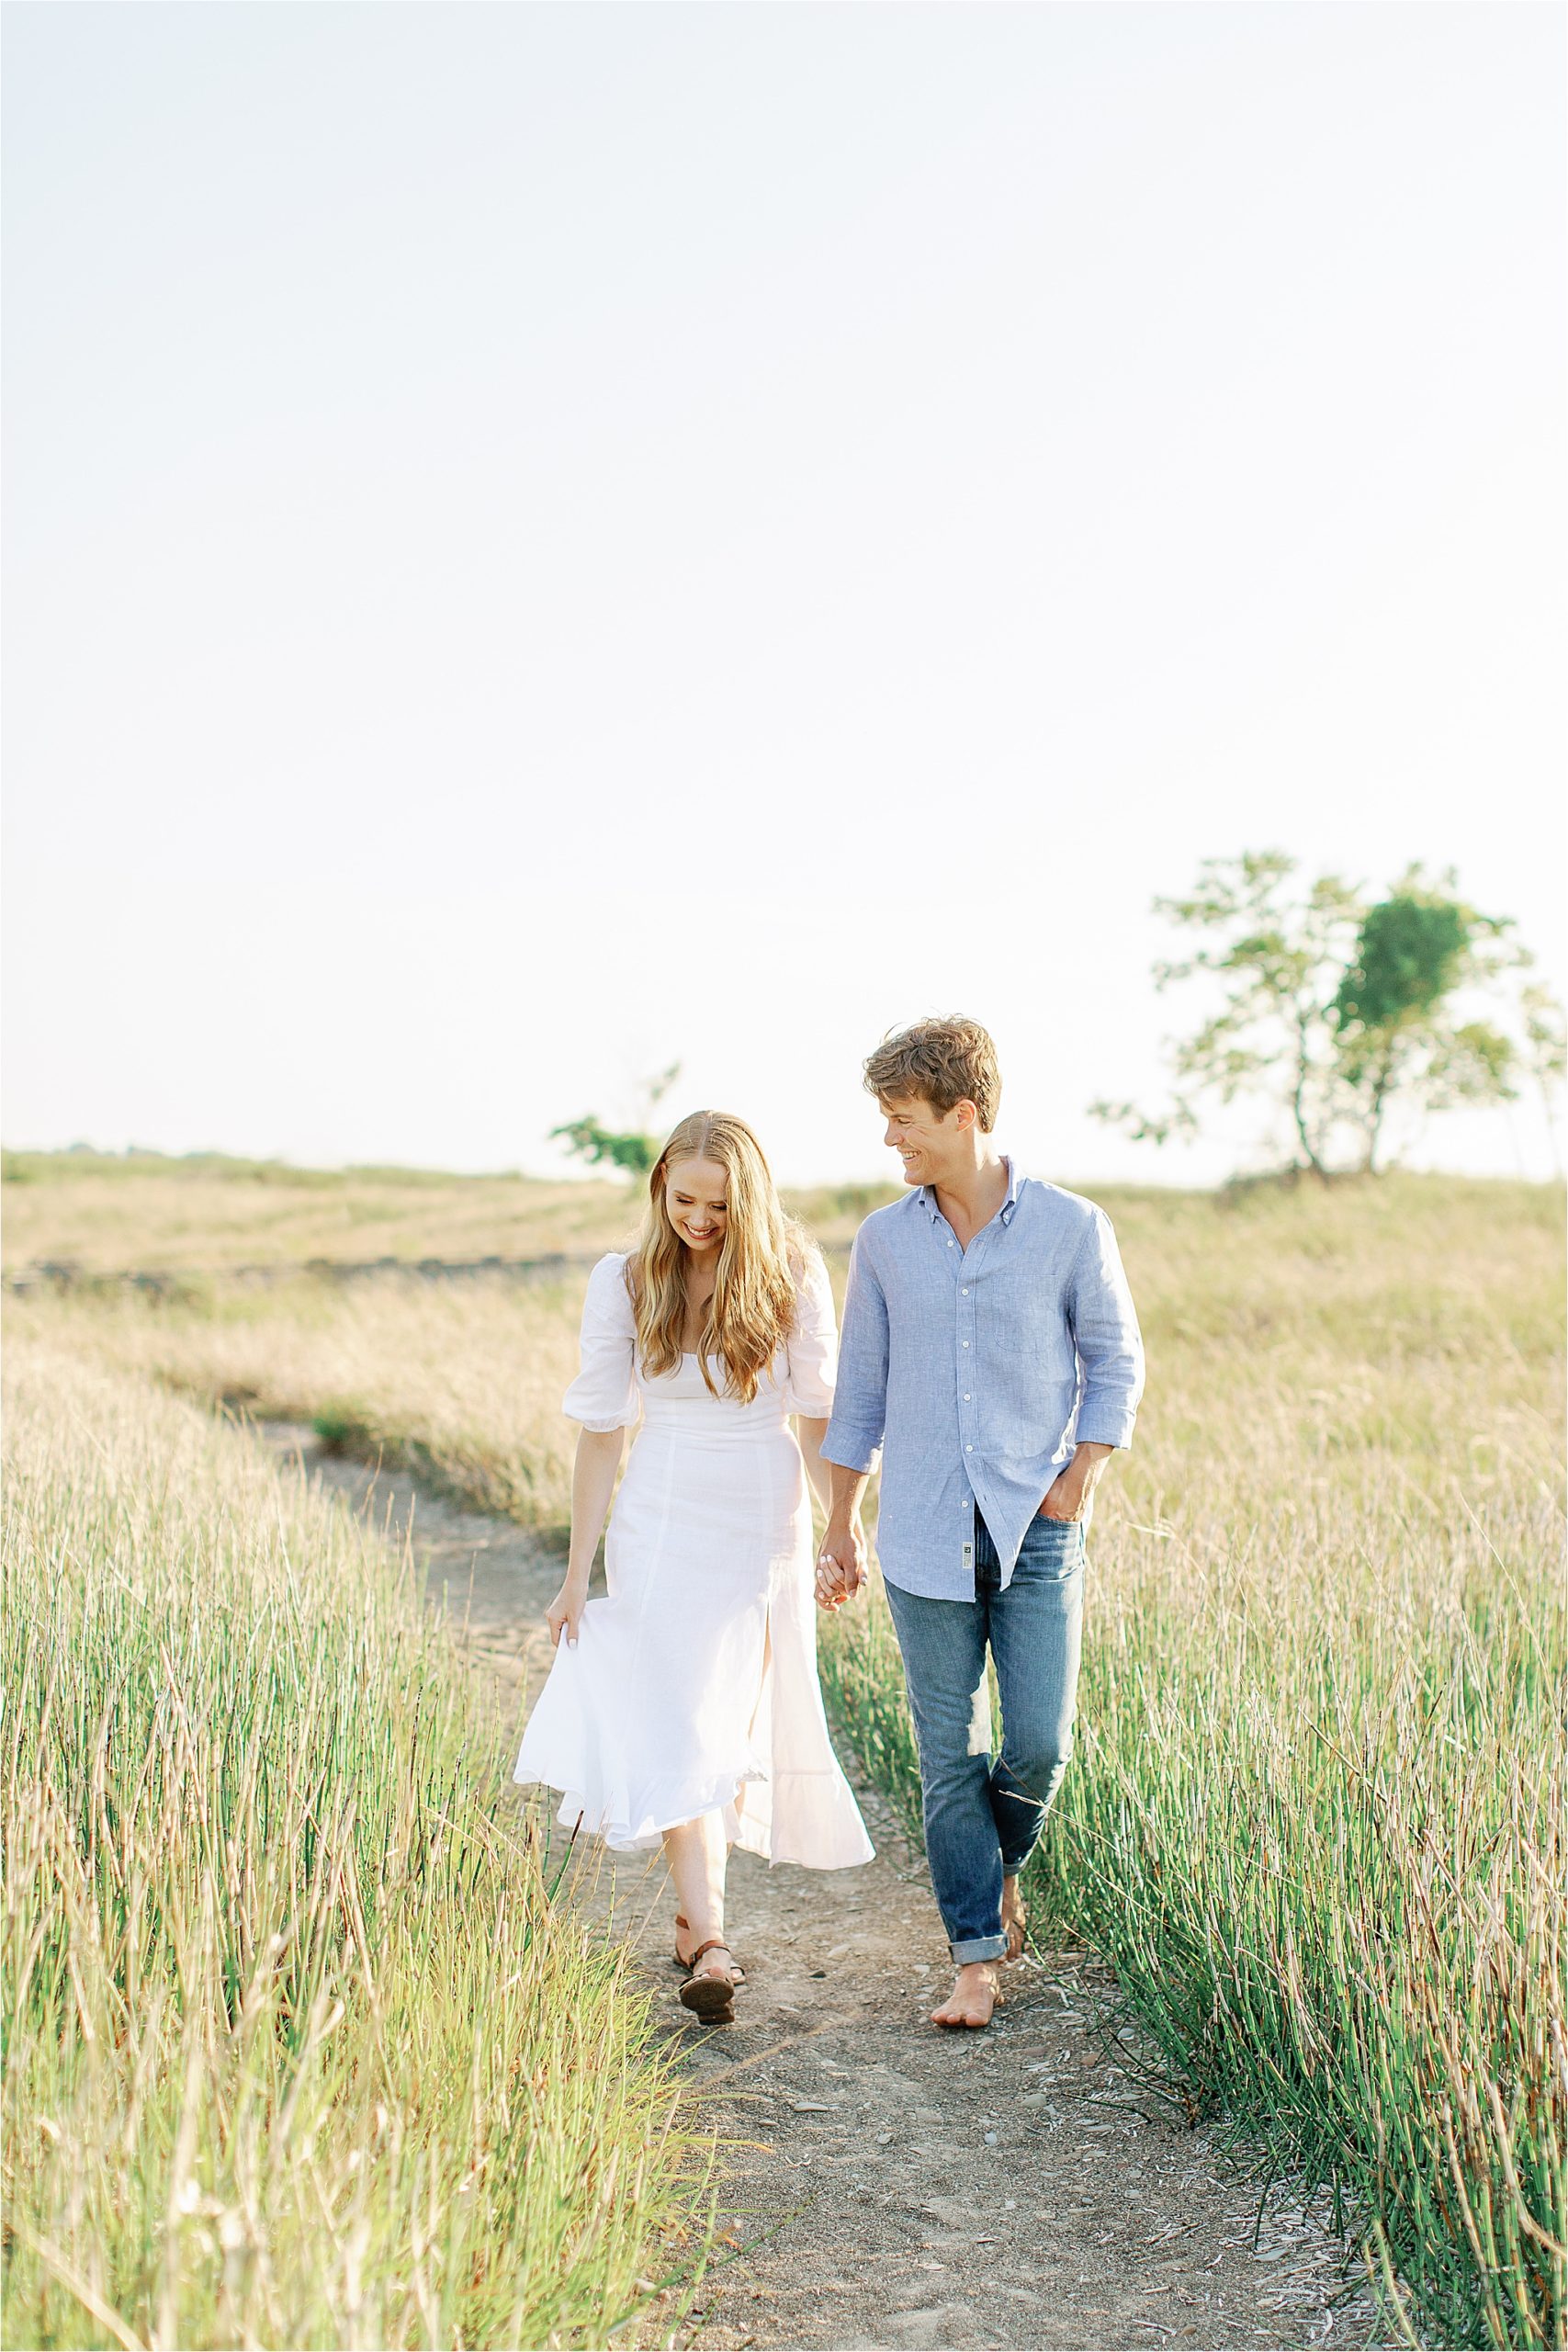 couple walking down beach lane atengagement session by Cleveland wedding photographers